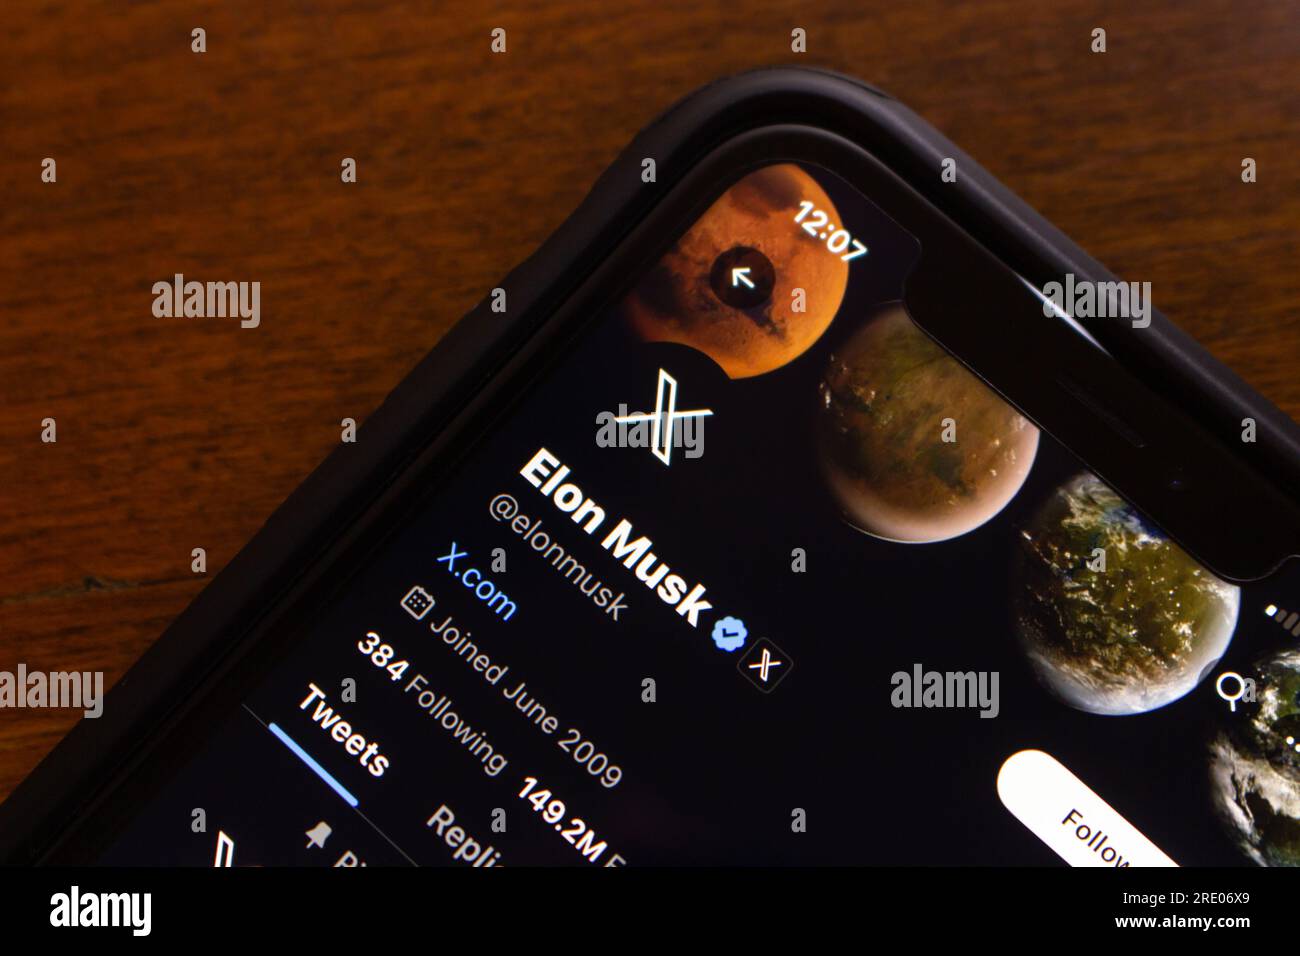 Elon Musk Twitter Account page seen in an iPhone. Elon Musk announced the Twitter name Rebrand as 'X'. The new X logo can be seen in an image. Stock Photo